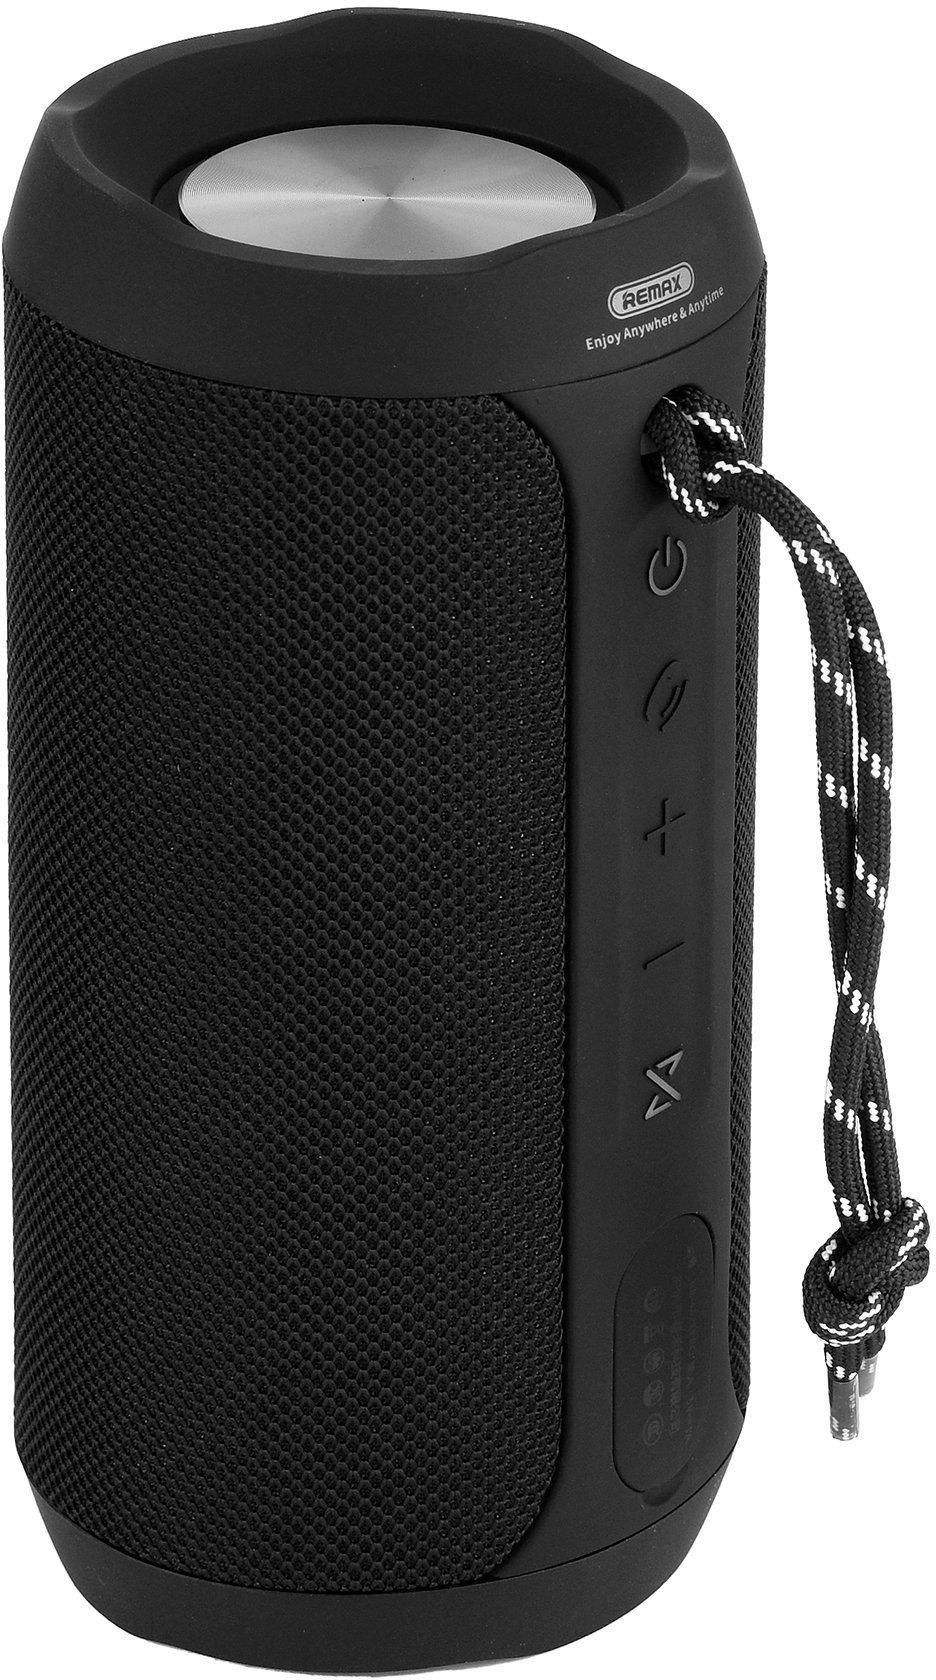 Remax Portable and Water Proof Bluetooth Speaker, Black